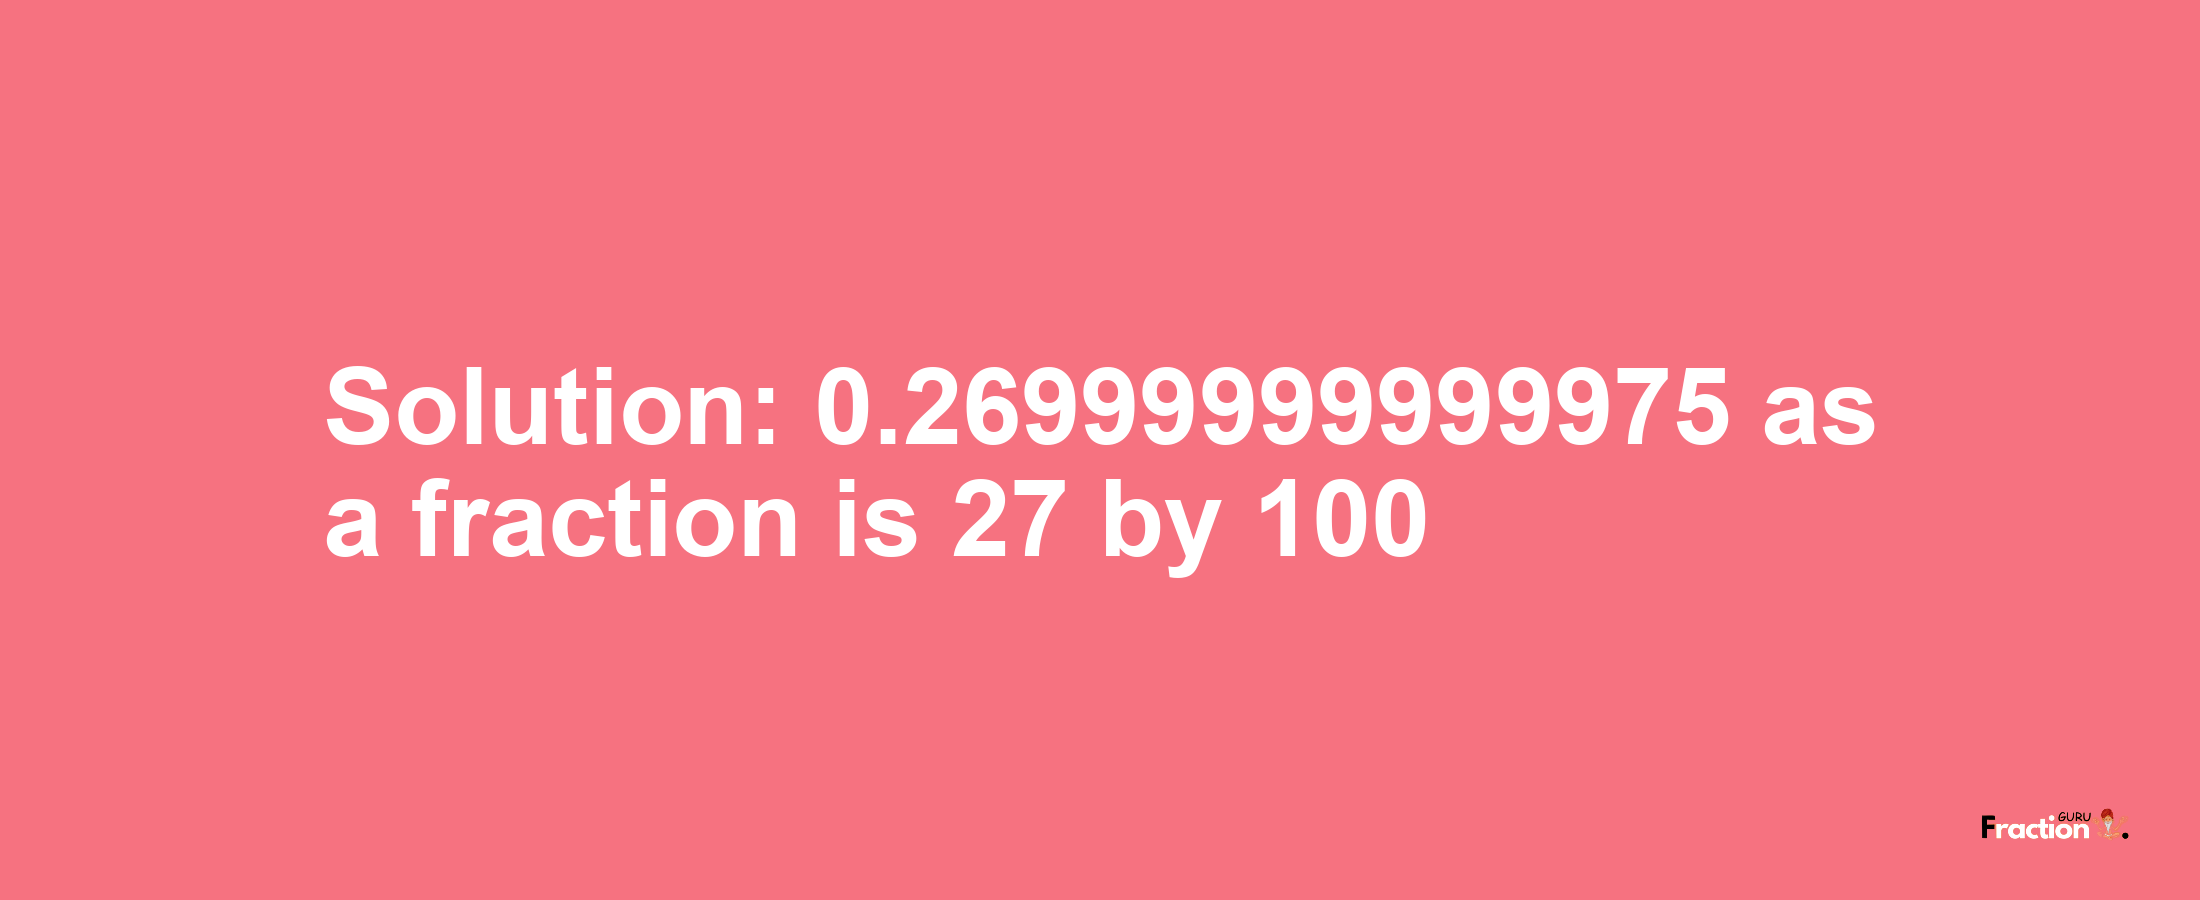 Solution:0.26999999999975 as a fraction is 27/100